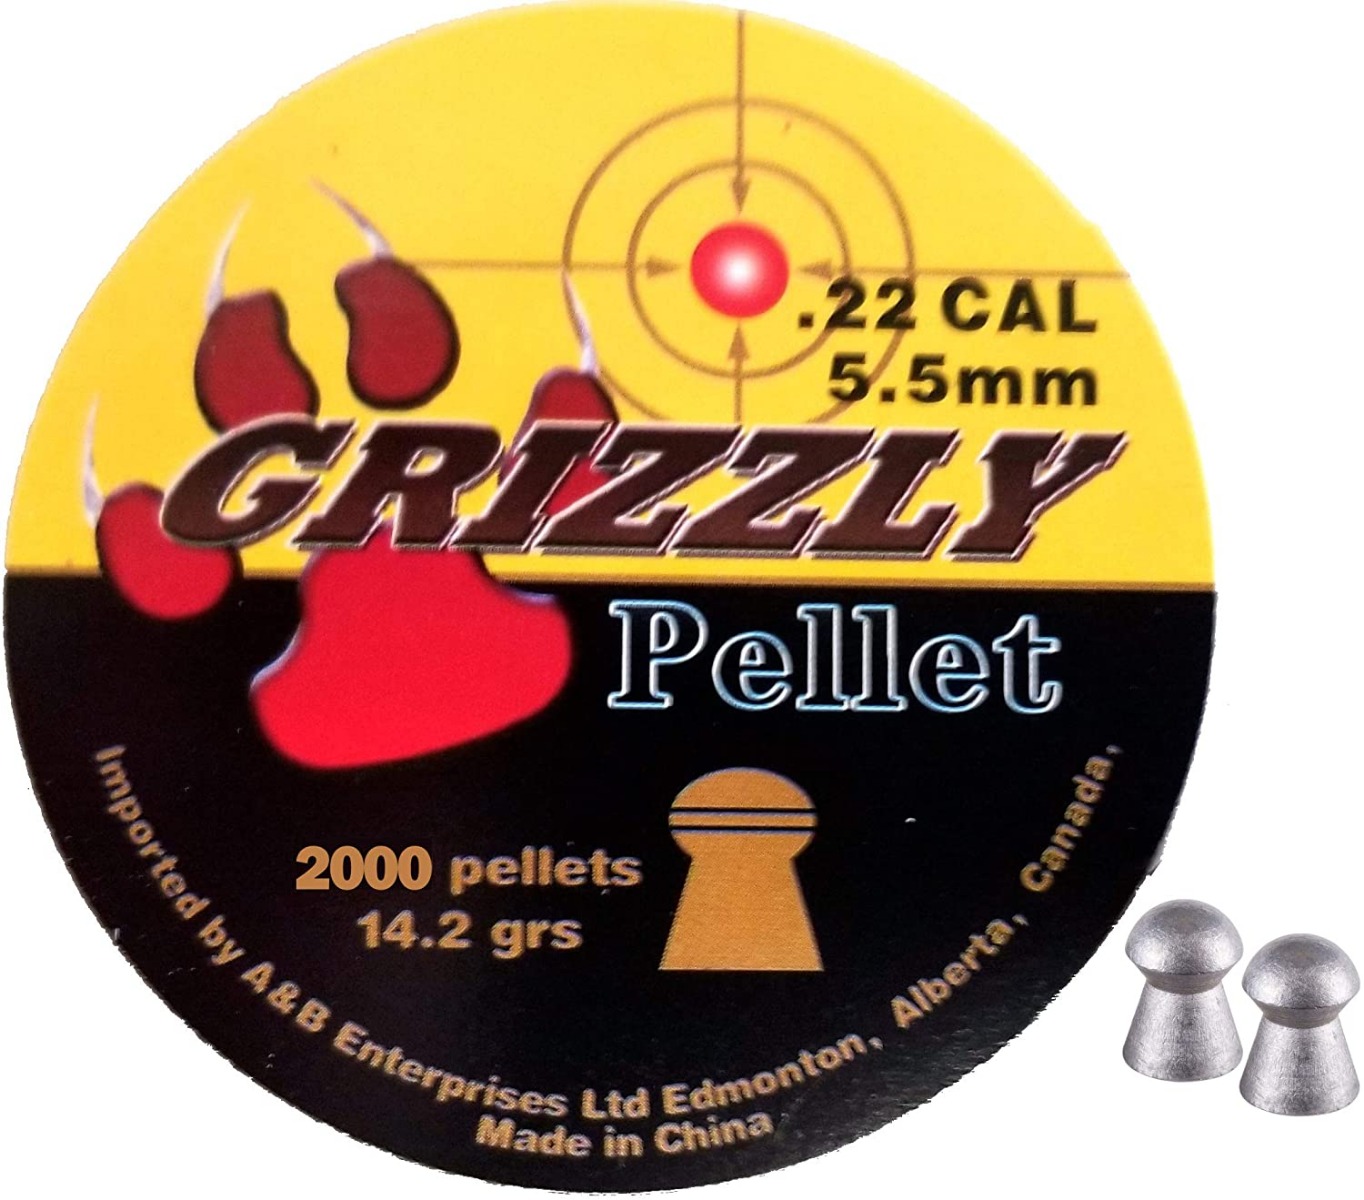 Grizzly .22 Pellet 250PKS x 8 for a Total of 2000 Rounds - Round/Dome Head Match Grade-0